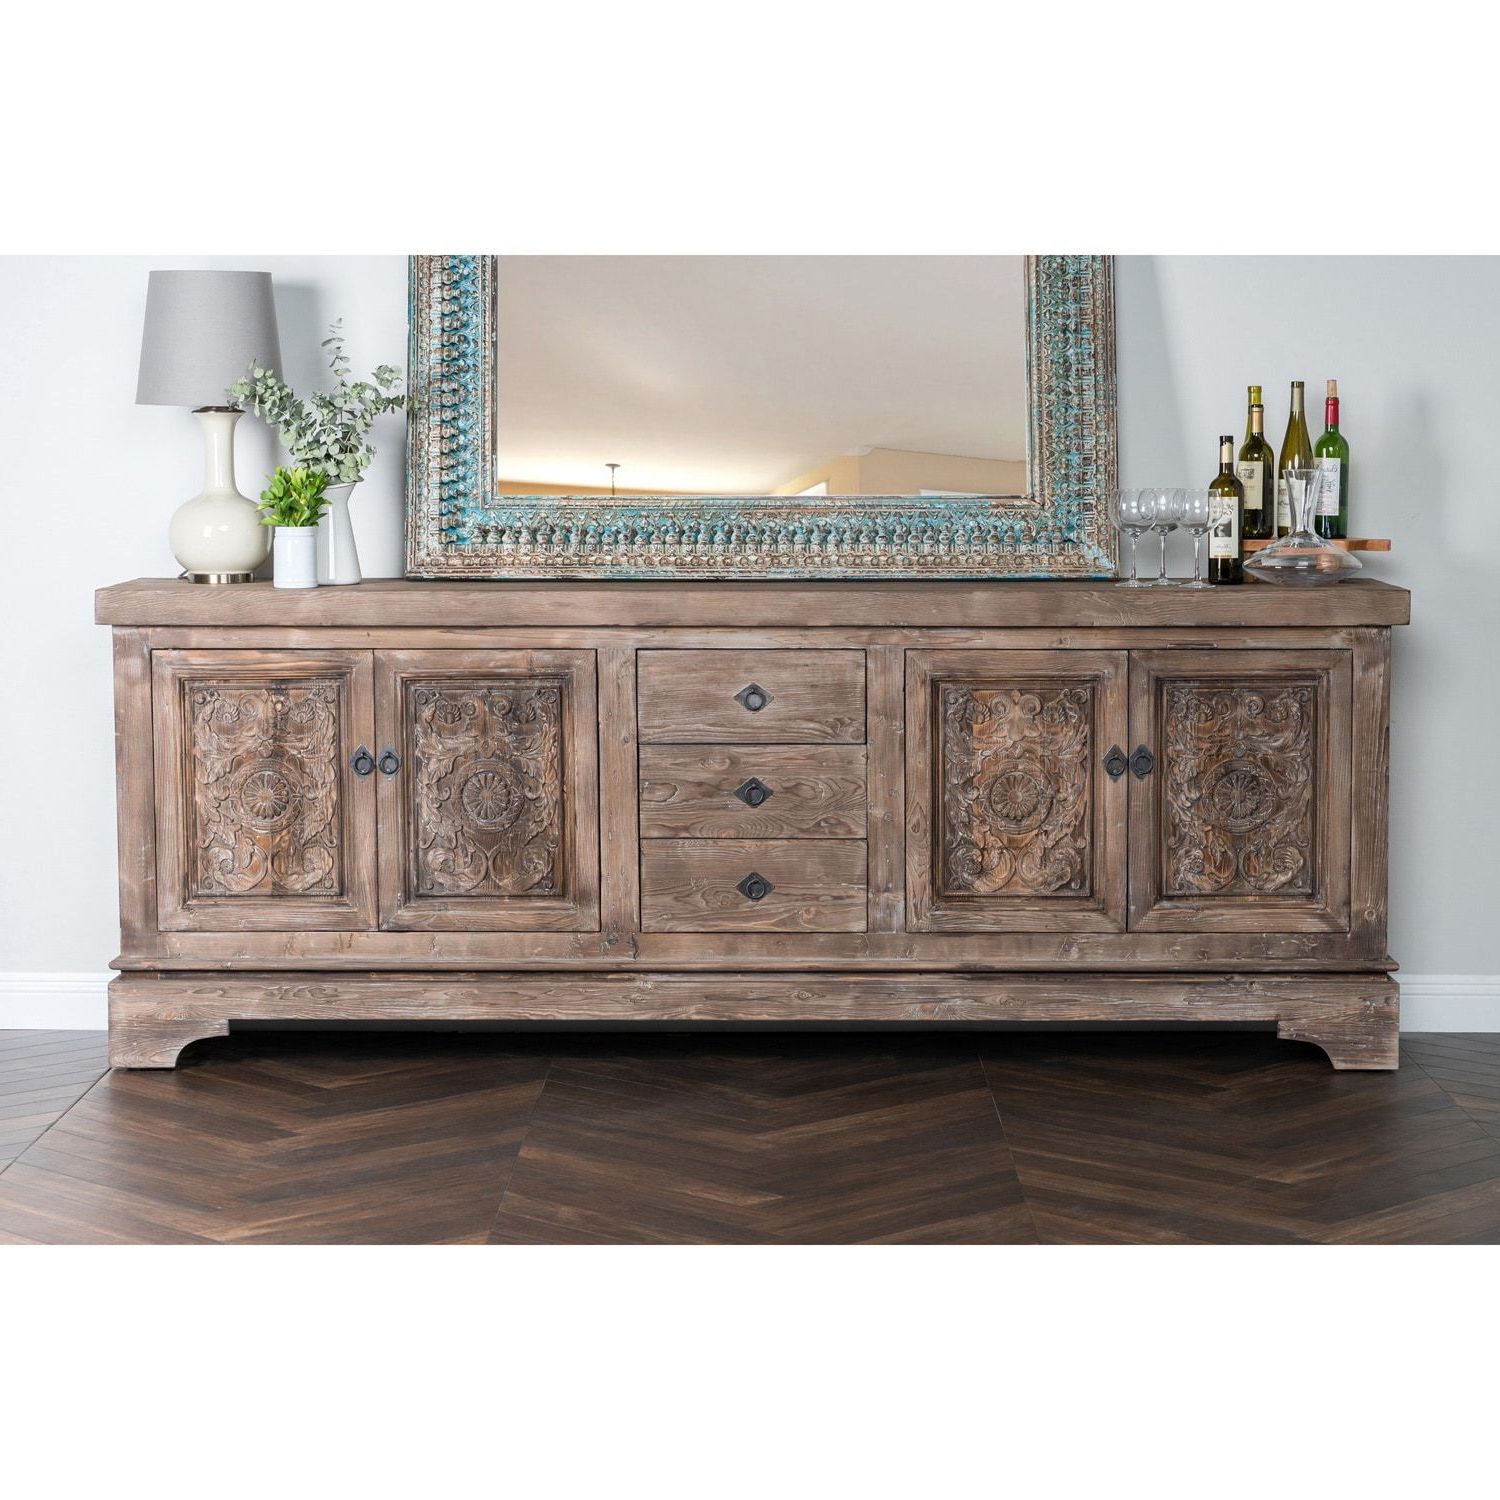 Allen Rustic Taupe Reclaimed Pine 106 Inch Sideboard Intended For Current Steinhatchee Reclaimed Pine 4 Door Sideboards (View 4 of 20)